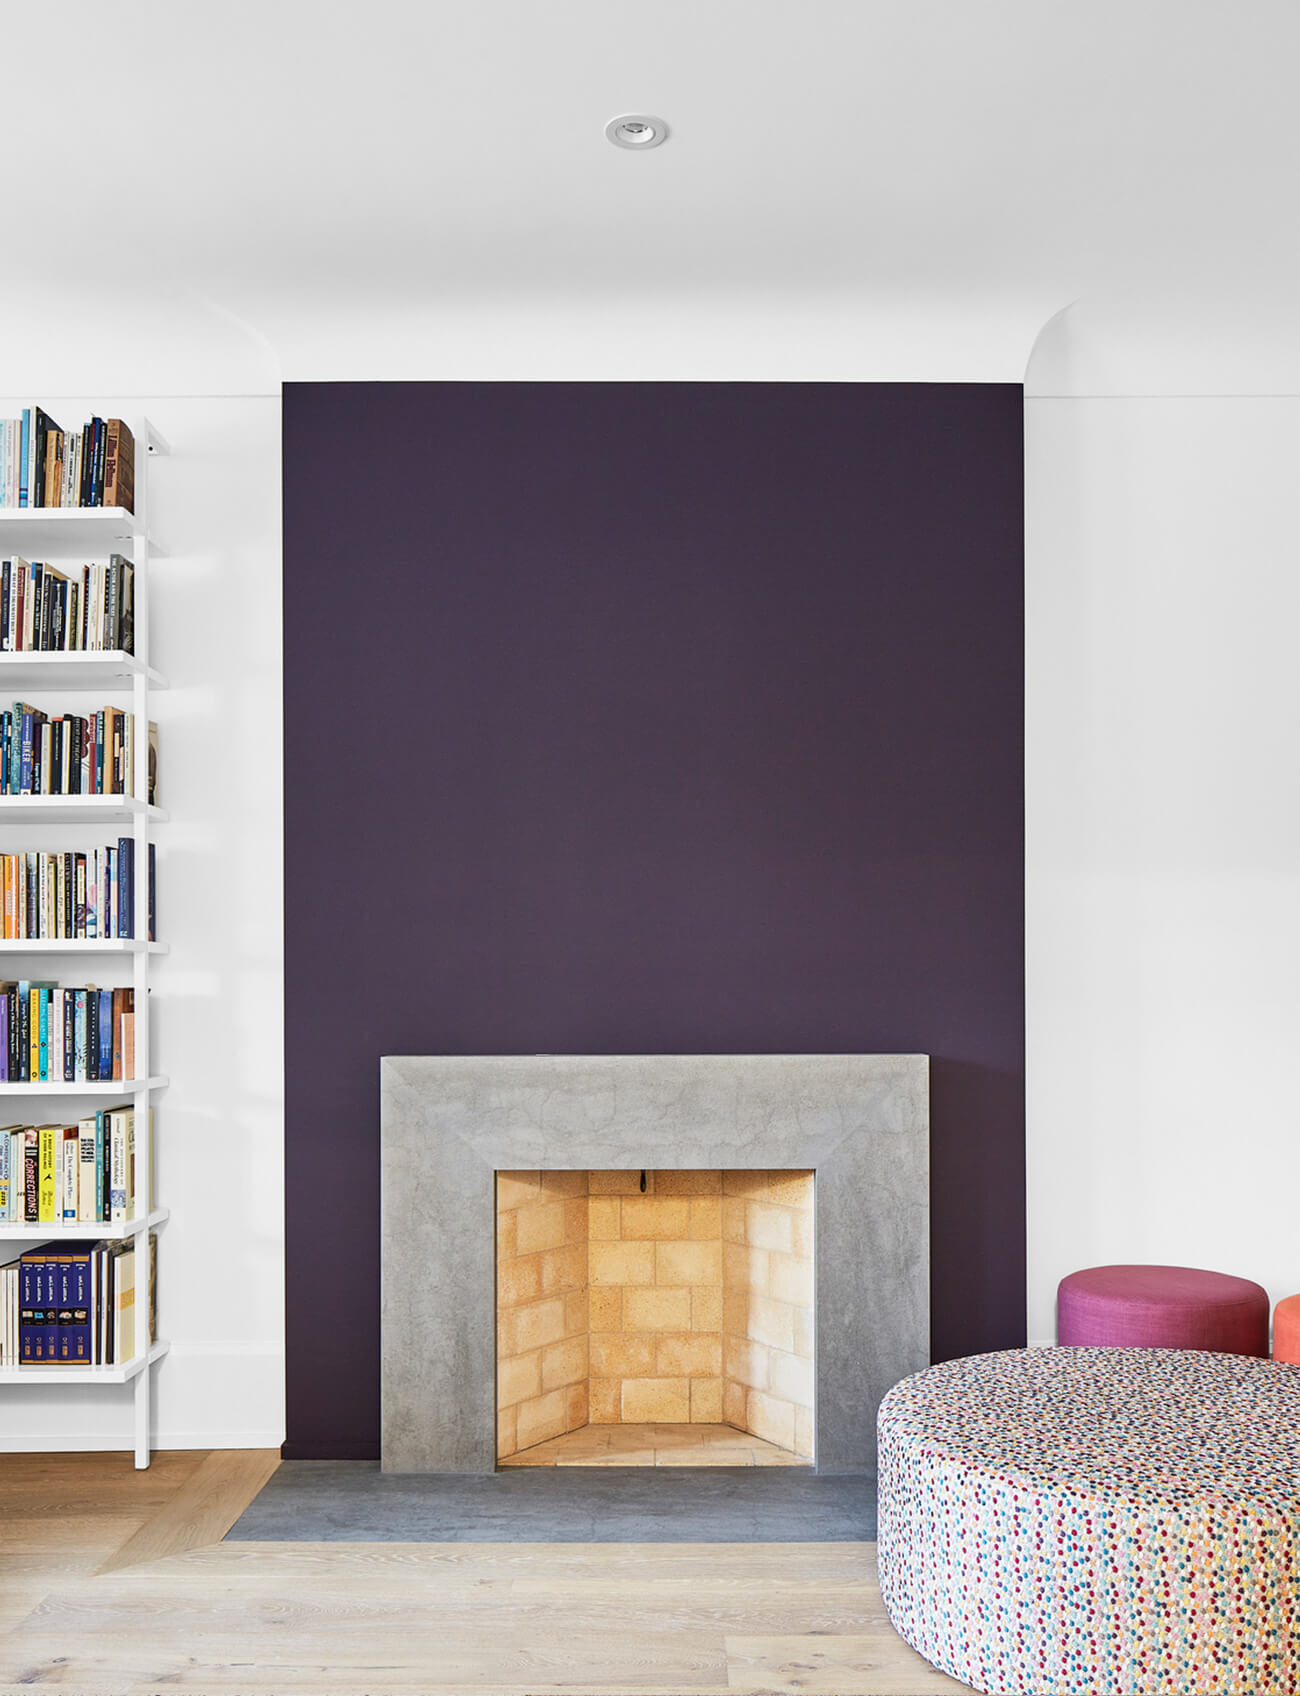 The fireplace was rebuilt to suit the new, sleeker space. A rich purple was used both to offset the home's bright palette, but also to match accents in its original stained glass windows.